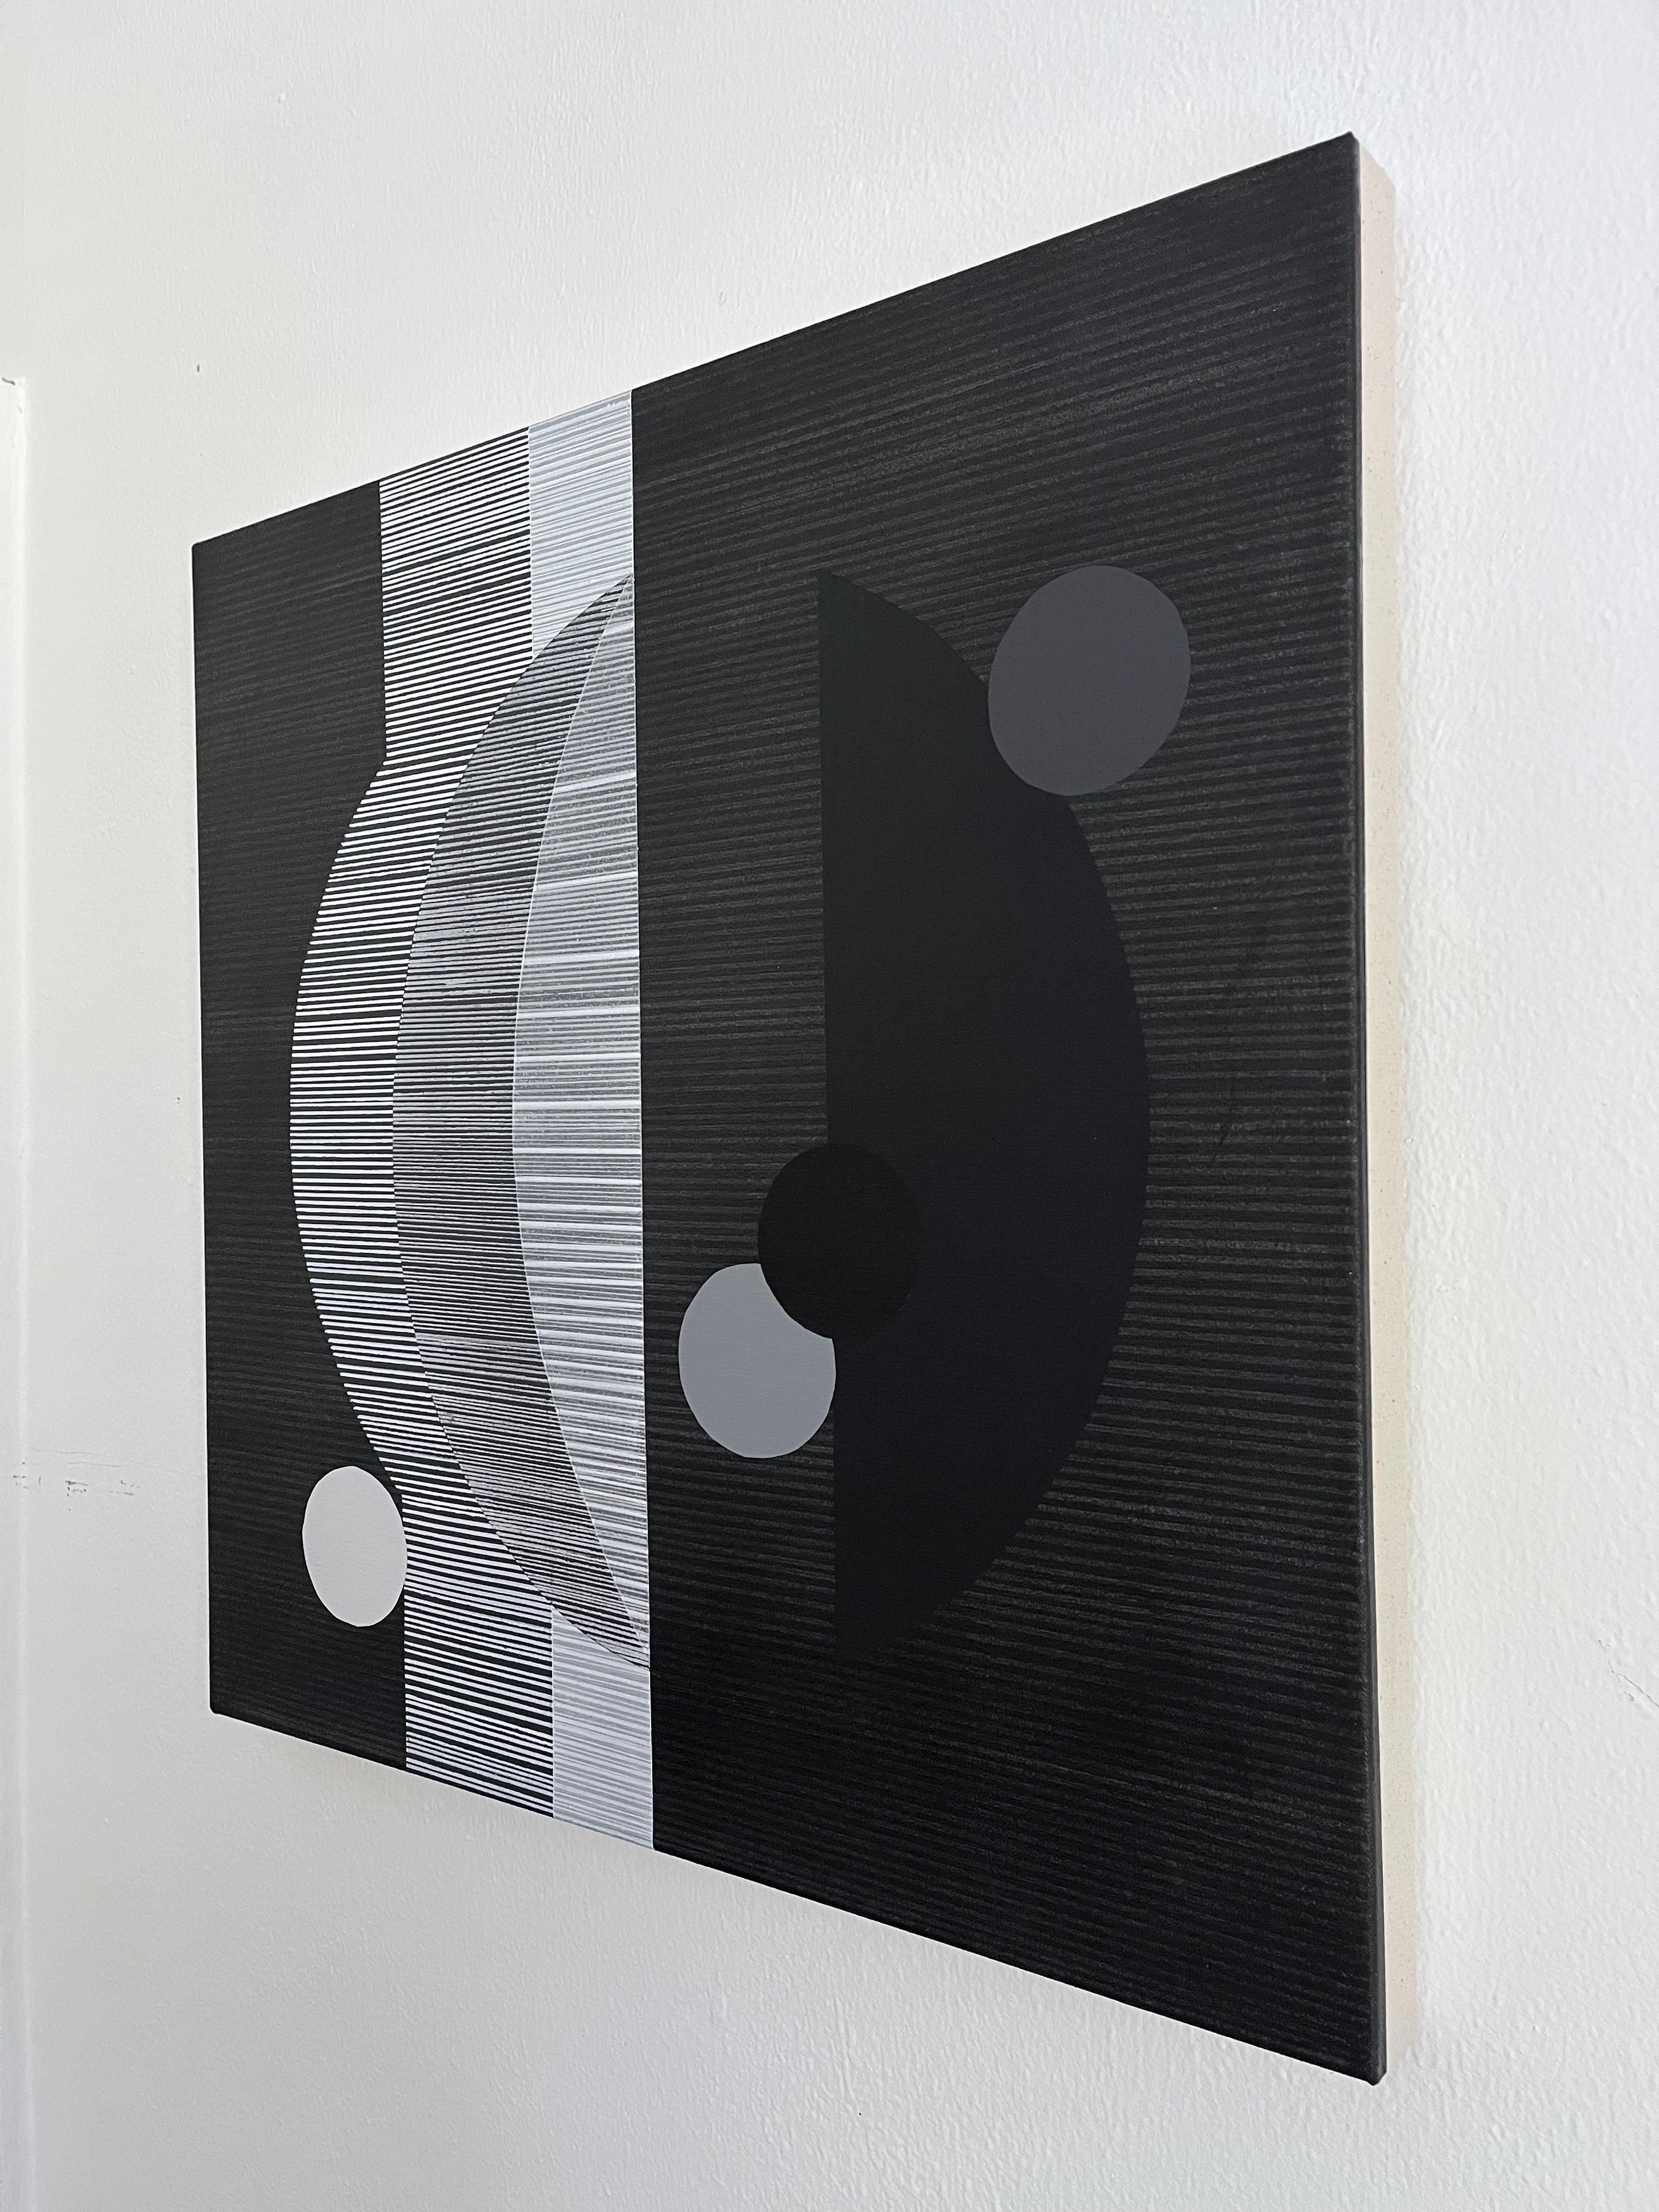 <p>Artist Comments<br>Artist Patrick Duffey creates a dialogue between the imagination and removing limiting barriers of distance and various dimensions. The monochromatic painting features straight lines in unique arrangements and varying shades,